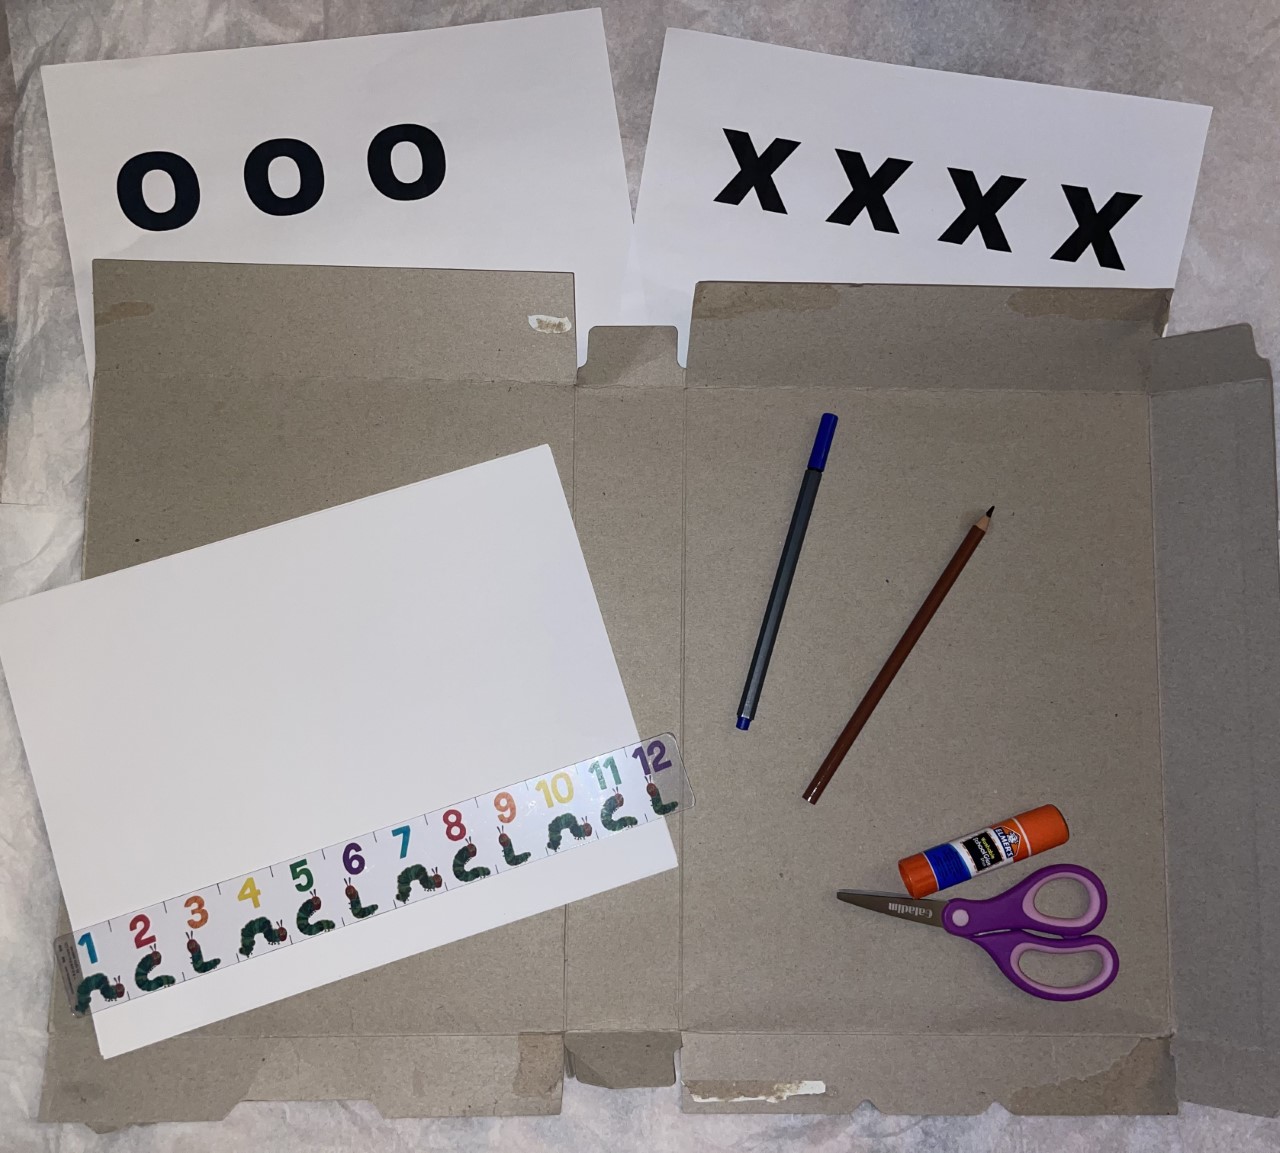 Dot Boxes and Tic-Tac_Toe: Paper & Pencil Games for Kid's 7-12